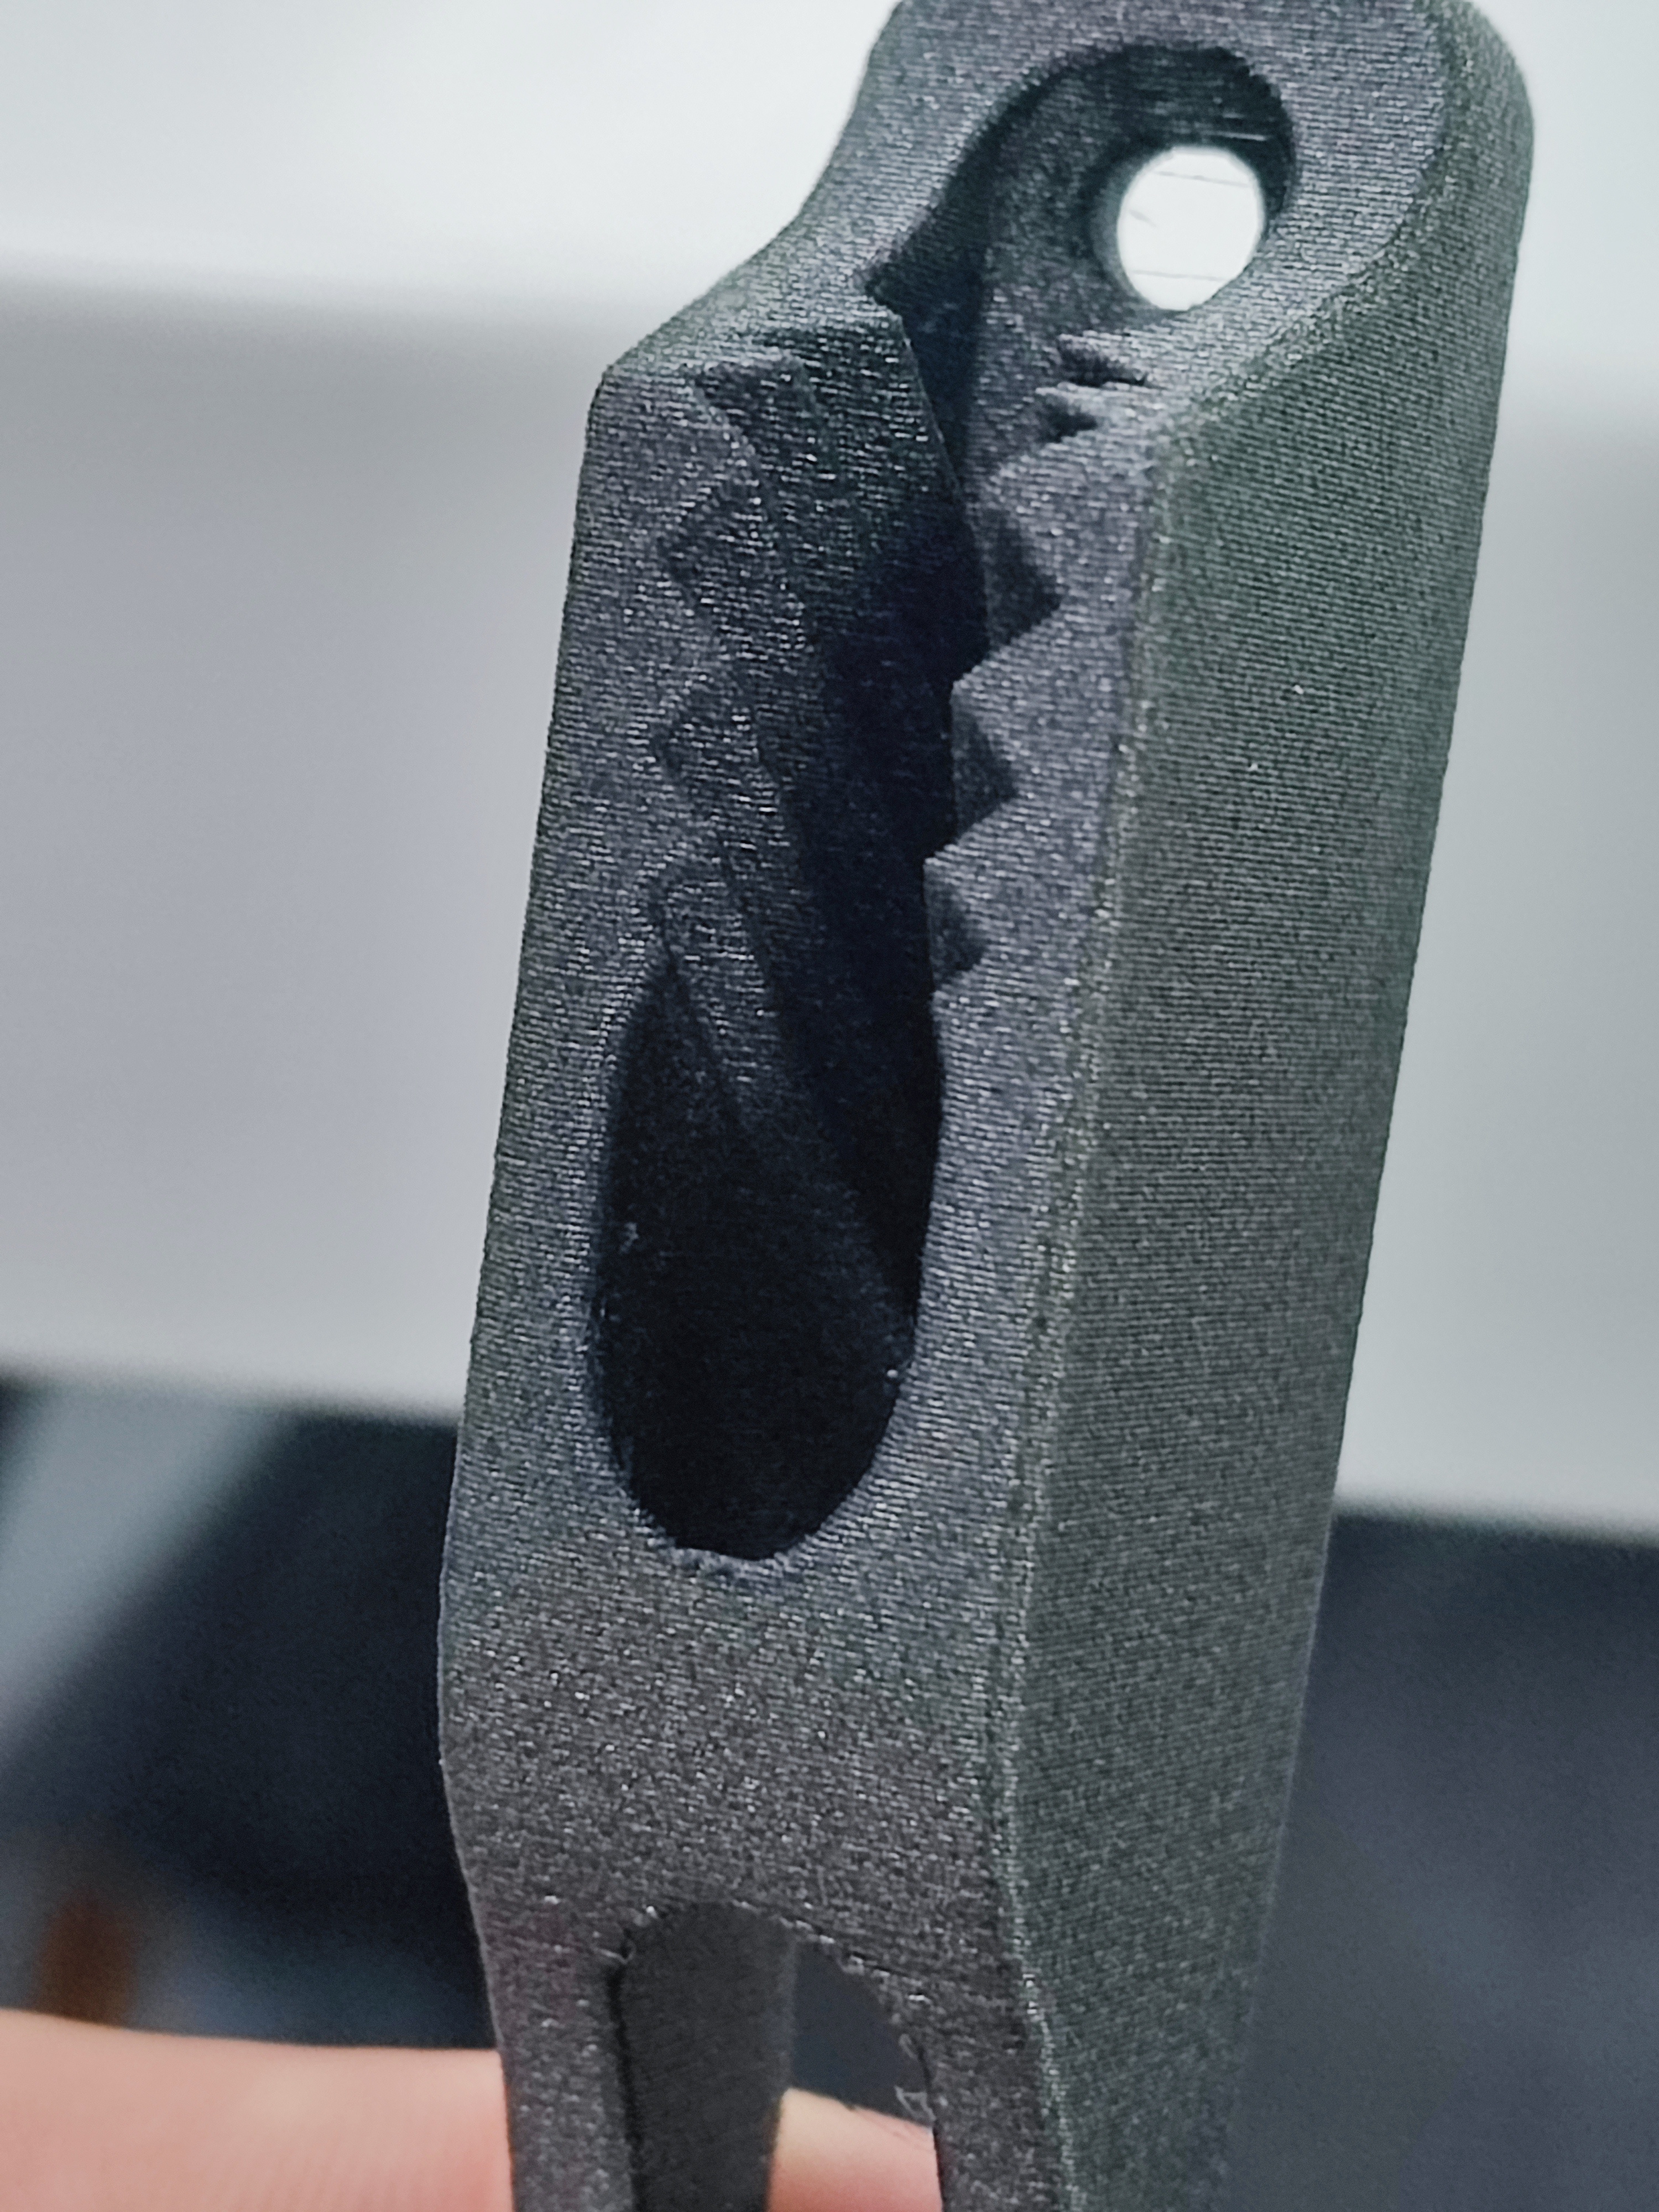 What are the commonly used nylon materials for 3D printing?